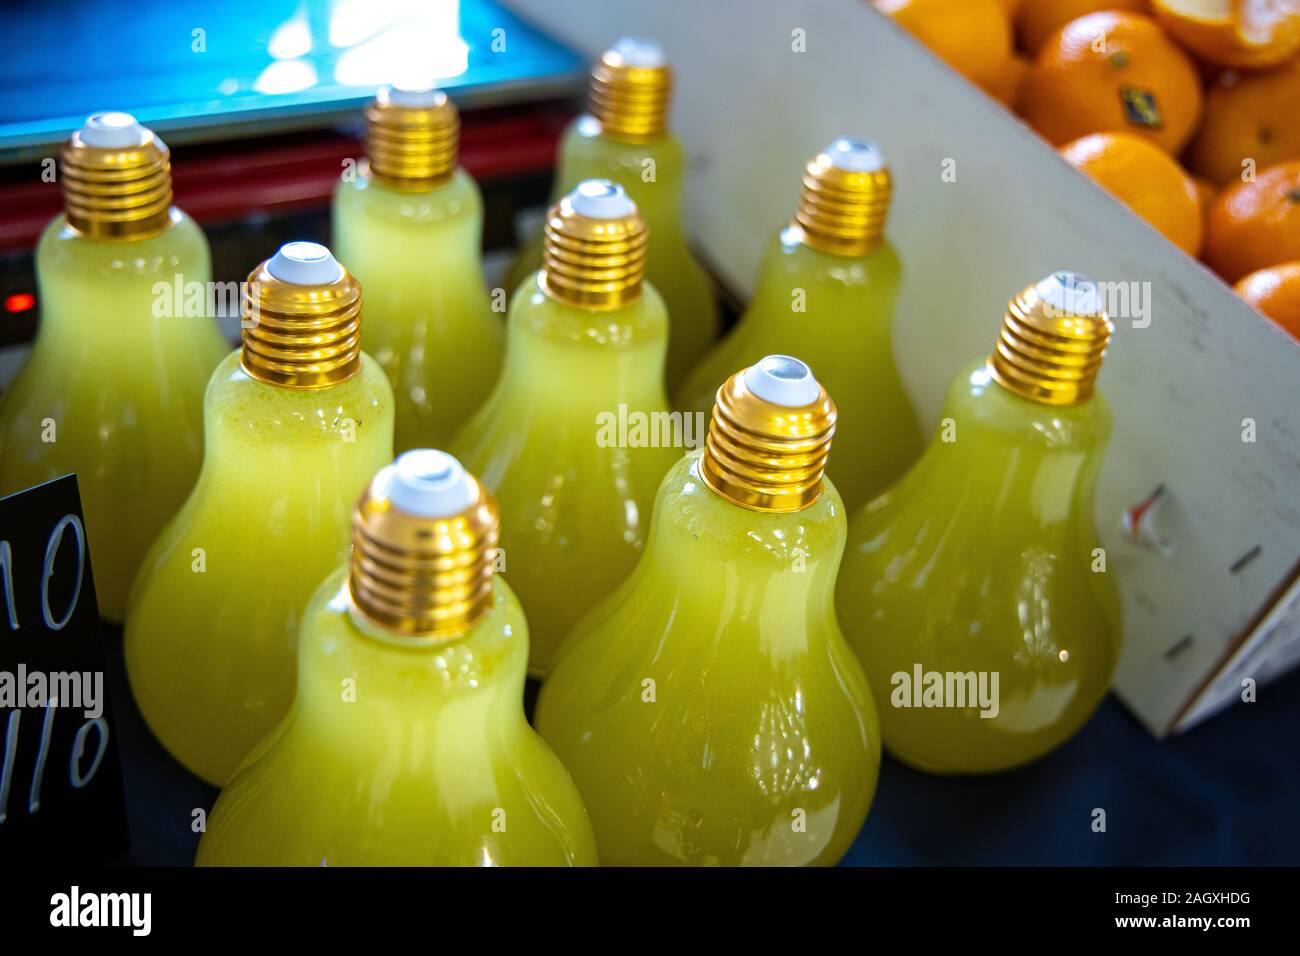 Limoncello Lemon Alcohol typical of Southern Italy. Bottles for sale in a Factory, Naples, Napoli, Italy Stock Photo